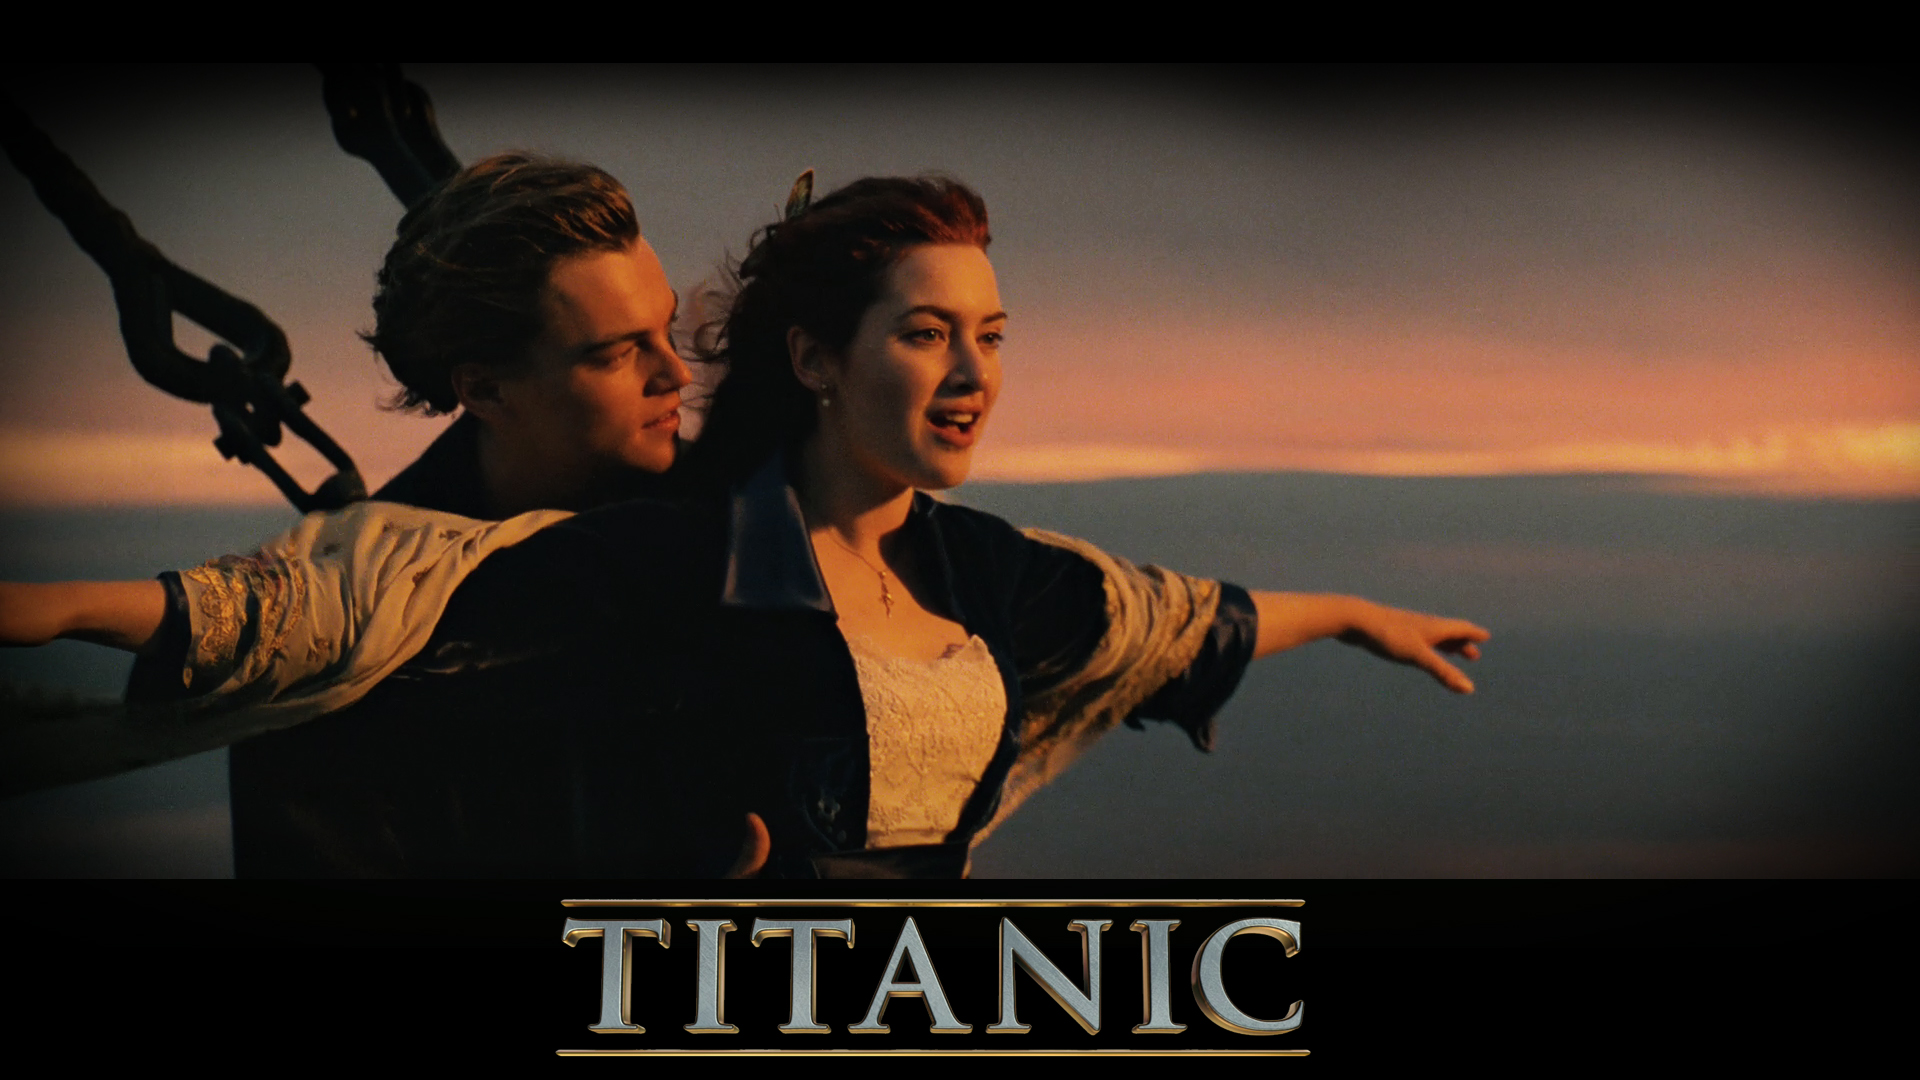 Titanic 3D Wallpapers HD Wallpapers 1920x1080